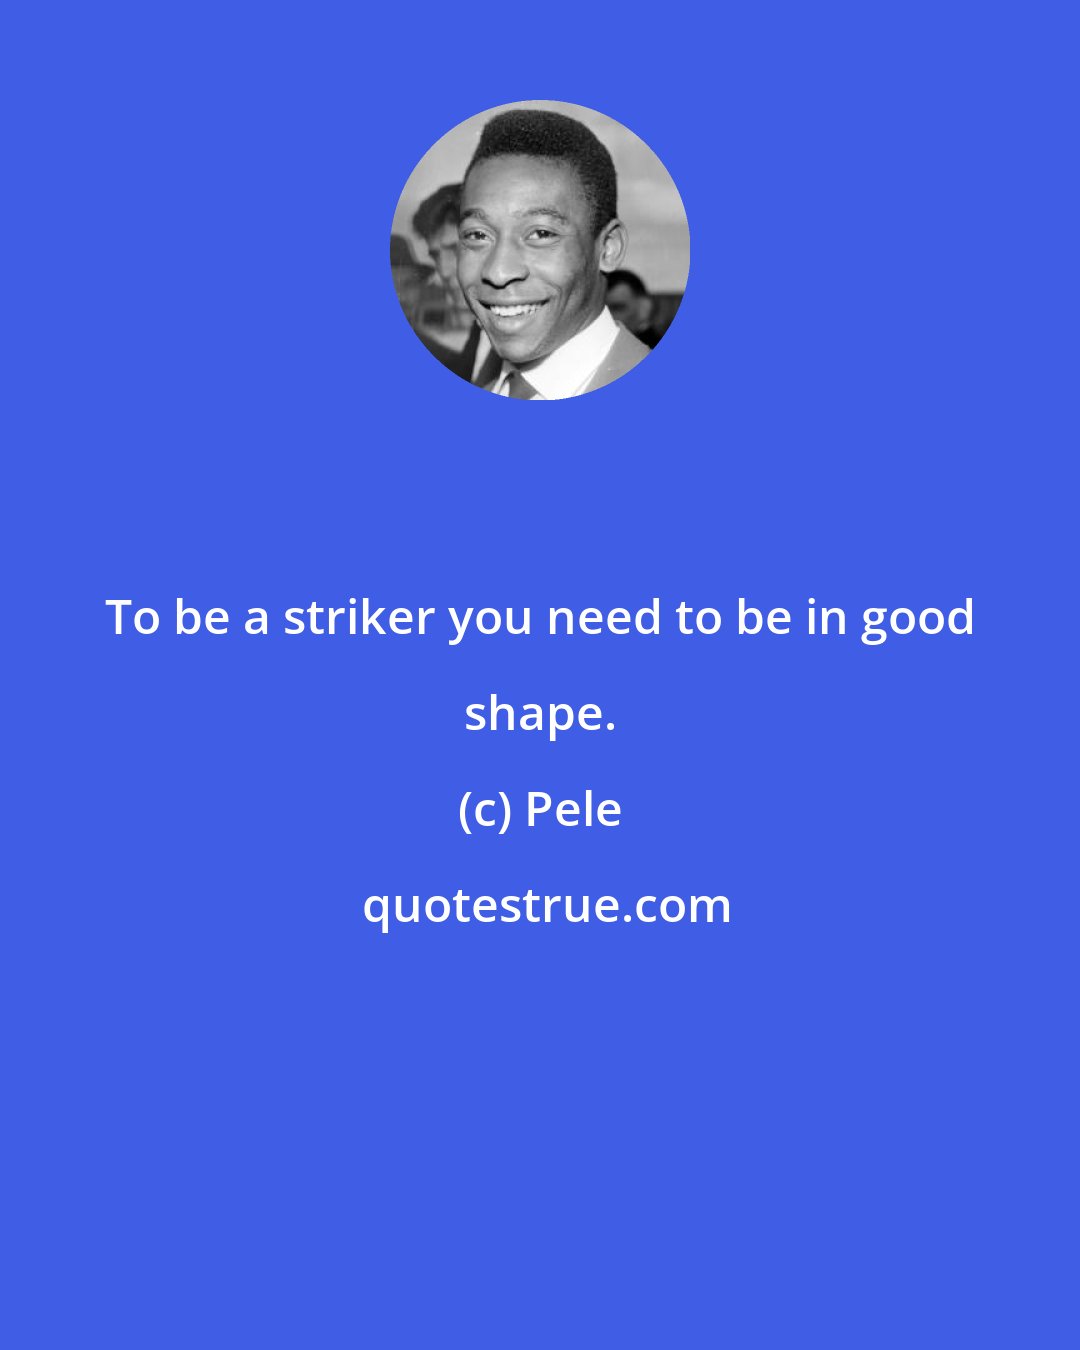 Pele: To be a striker you need to be in good shape.